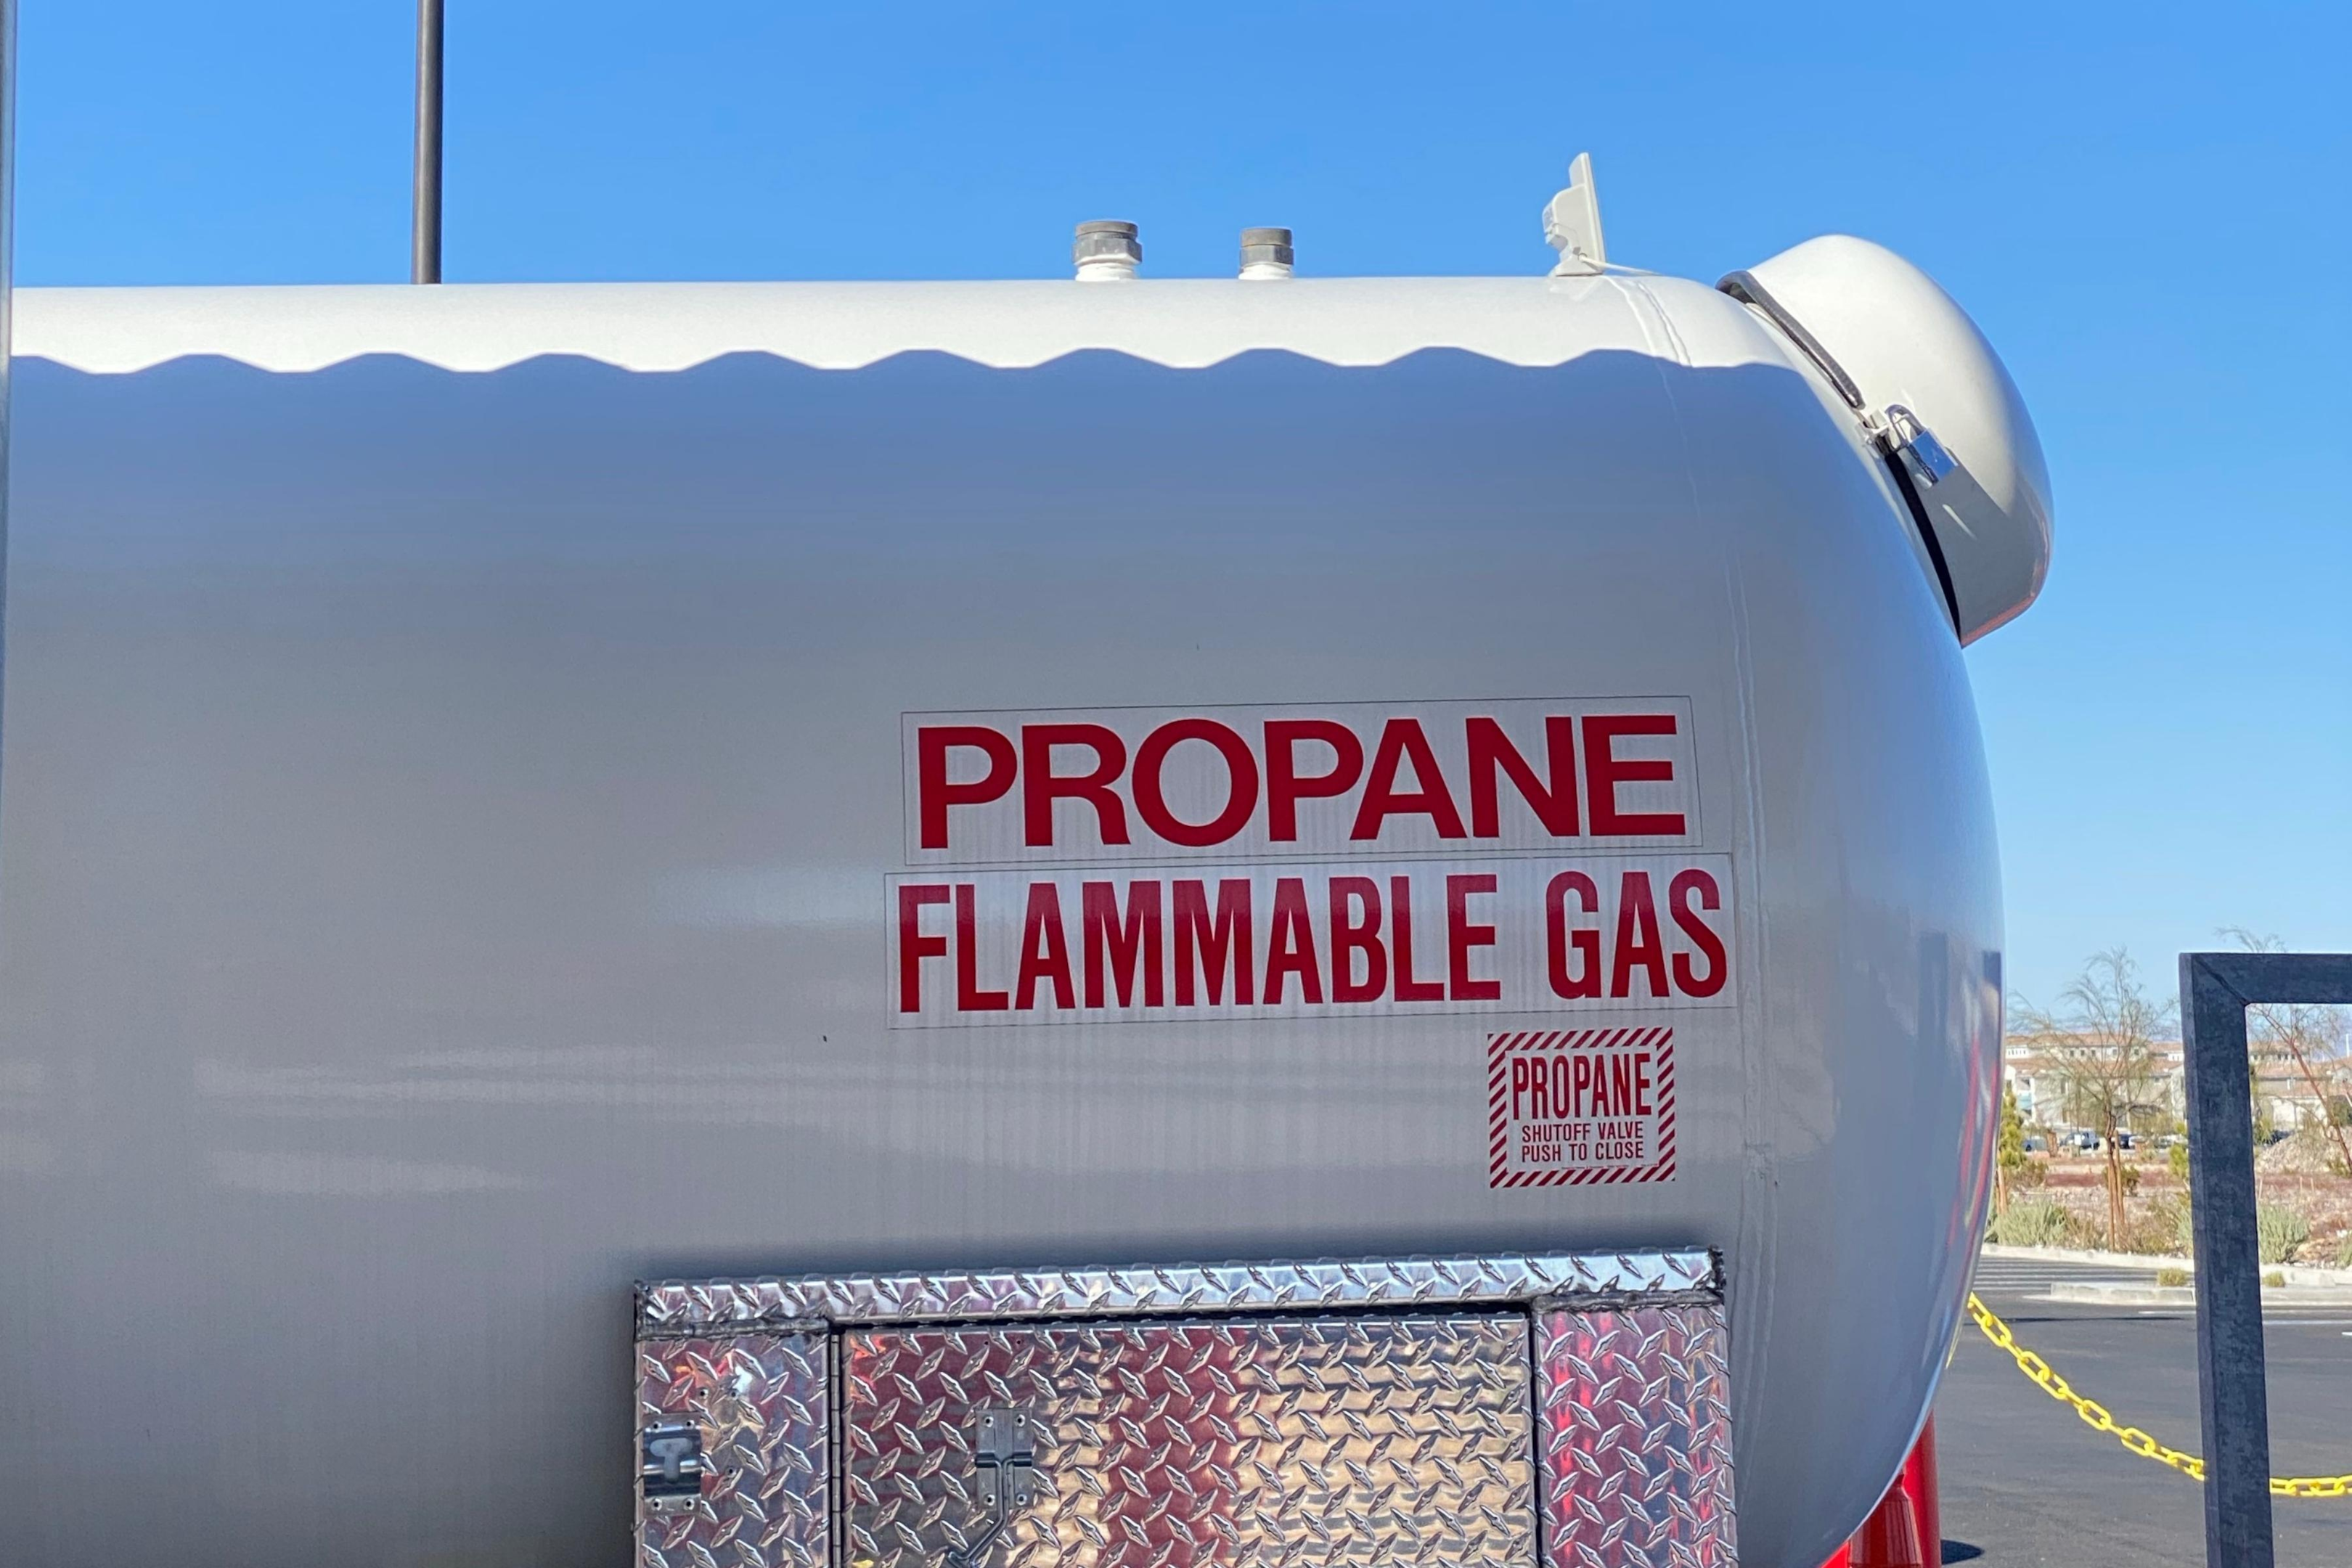 Does Propane have an expiration date?